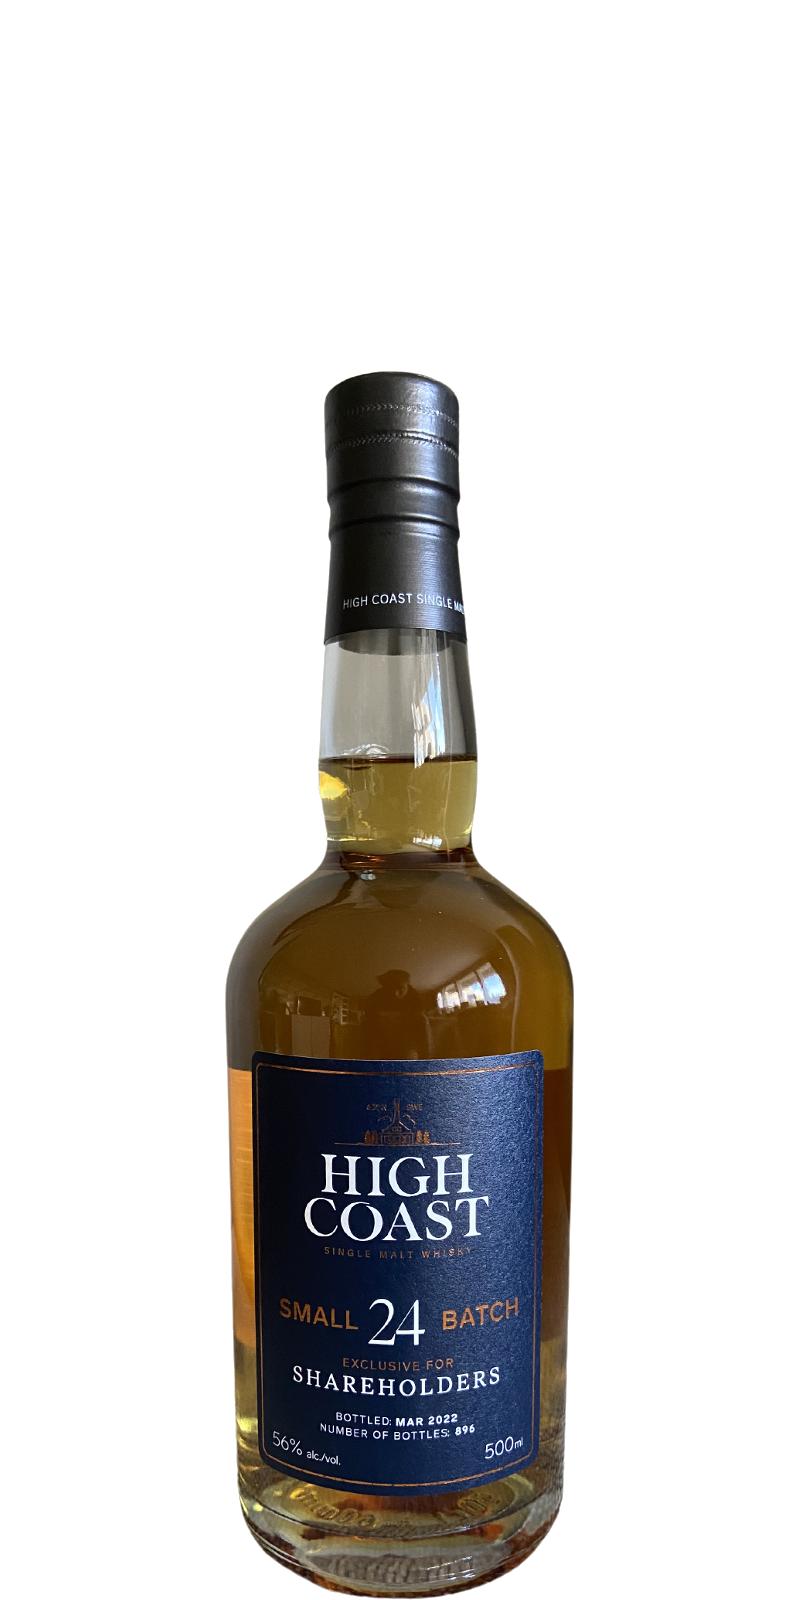 High Coast Small Batch 24 2nd fill Bourbon Exclusive for Shareholders 56% 500ml